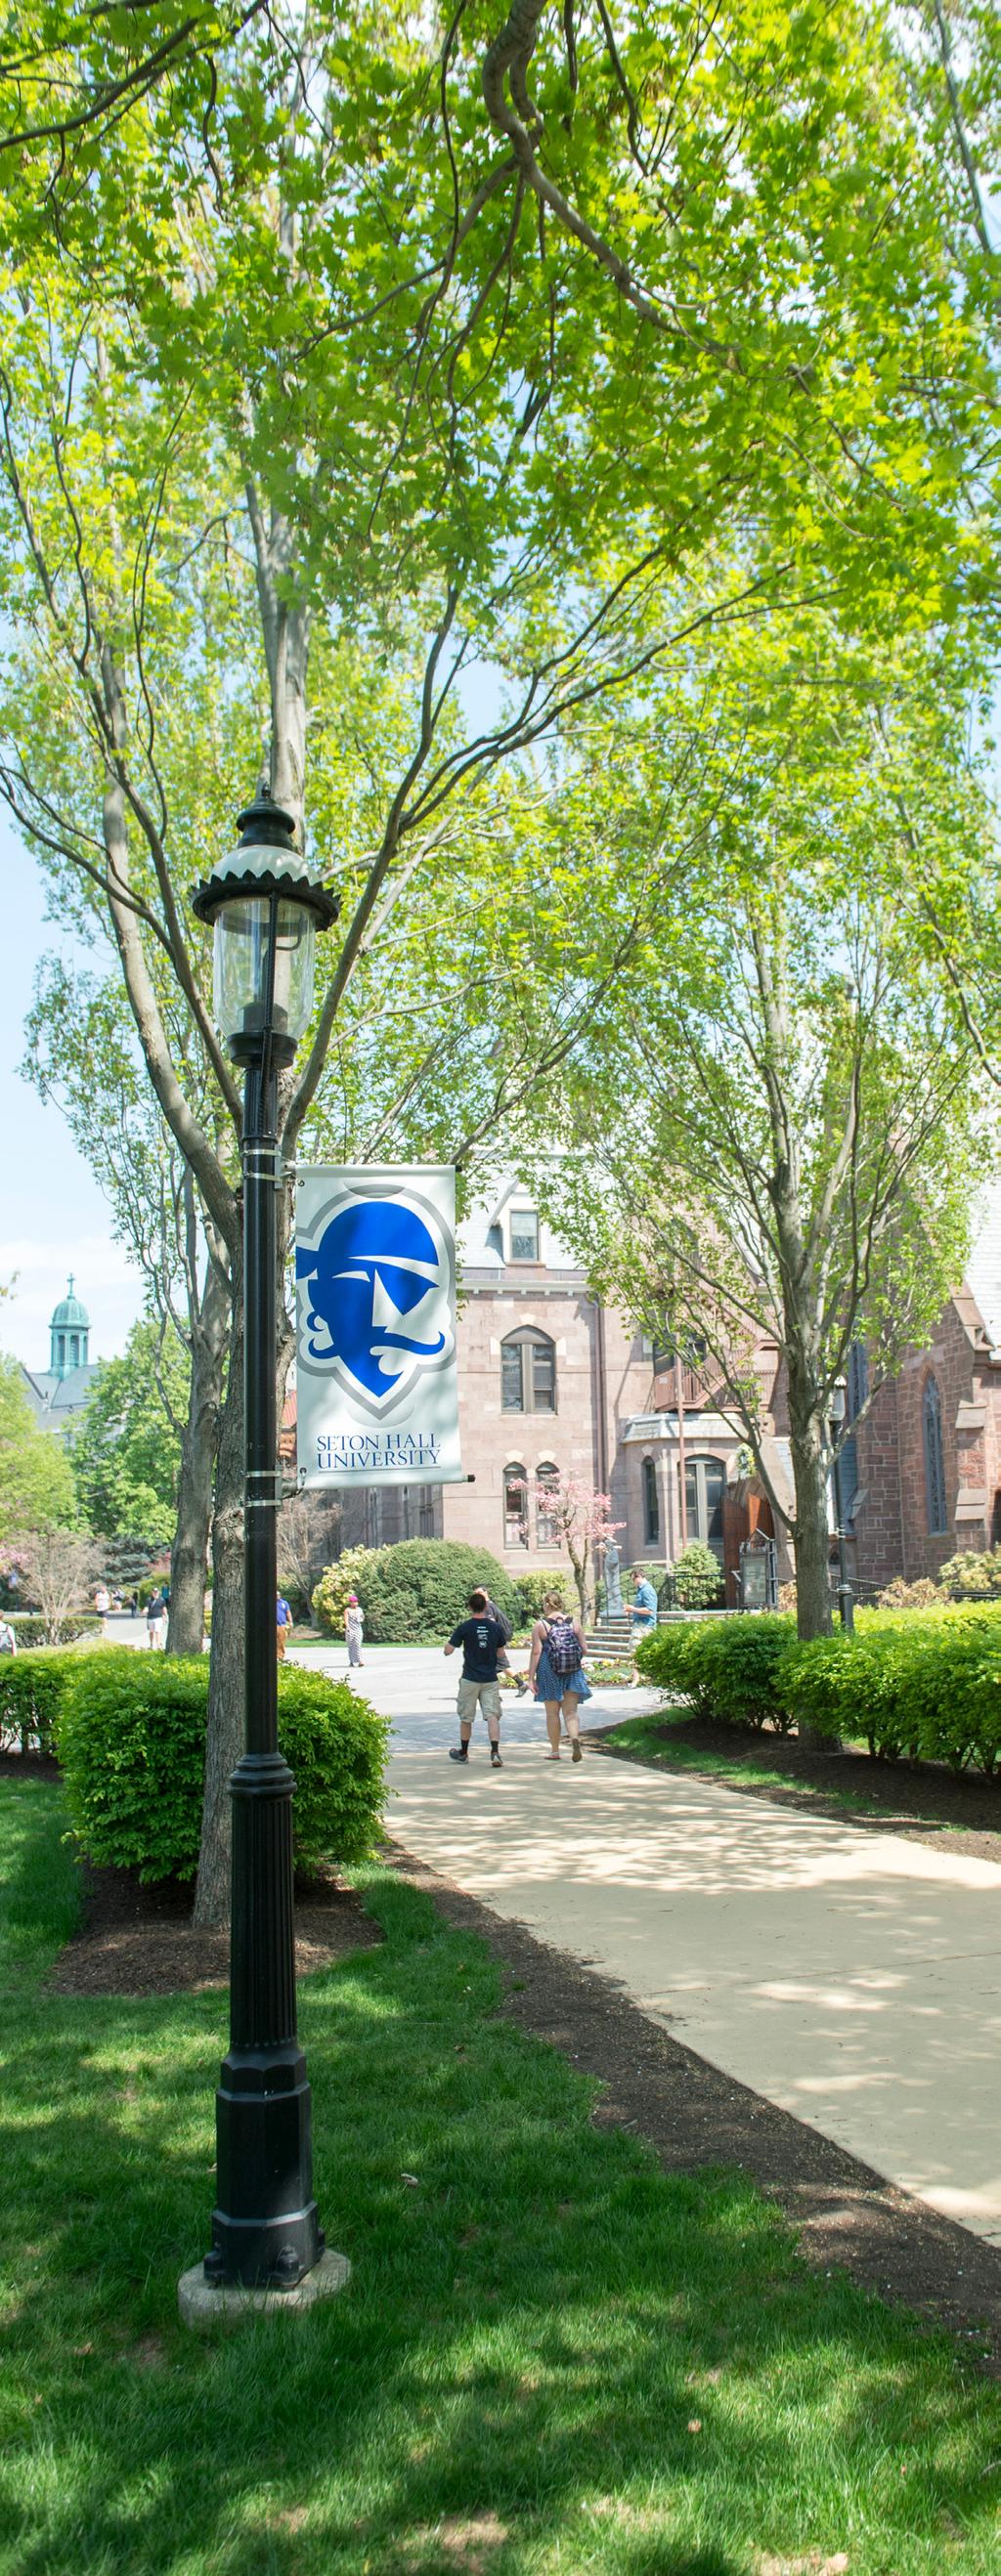 Seton Hall University An Overview Seton Hall University, one of the nation s leading Catholic universities, seeks a president to lead the institution into a new era.